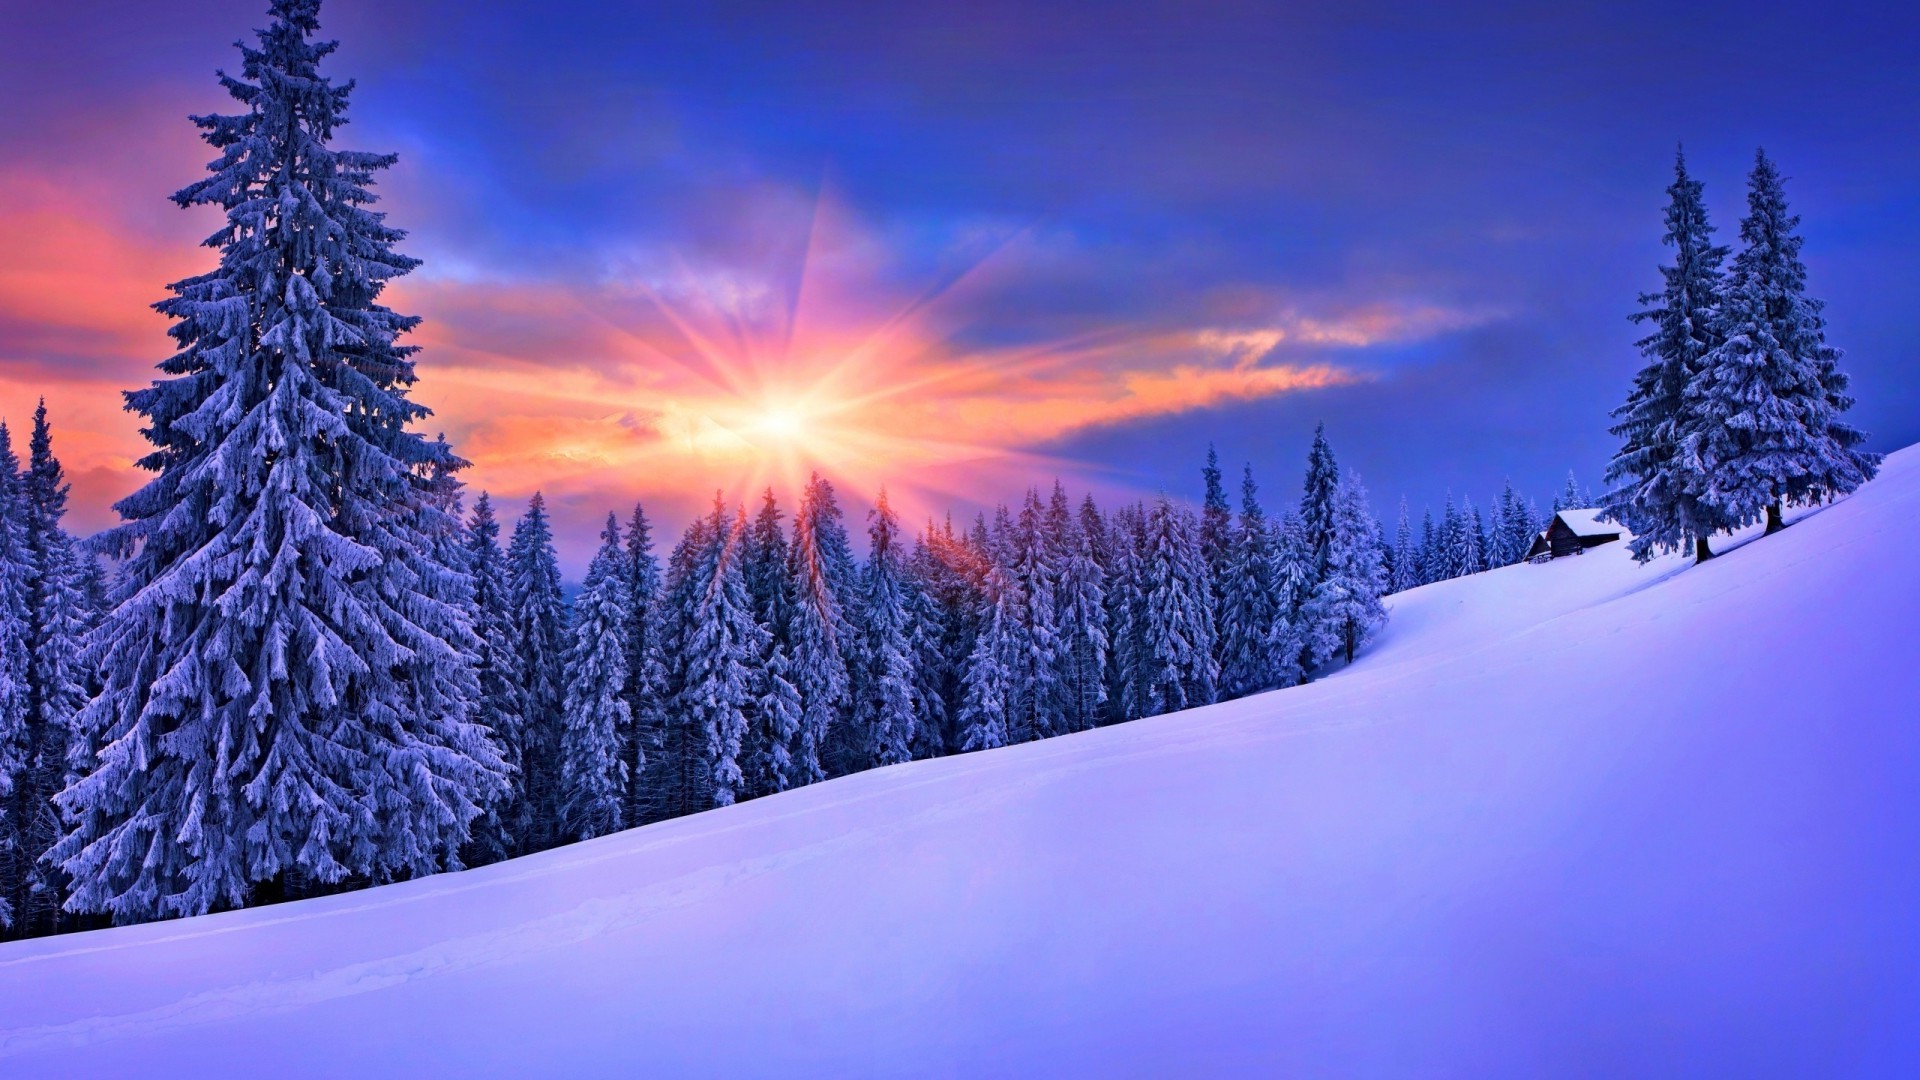 sun glare, snow background pictures hd download